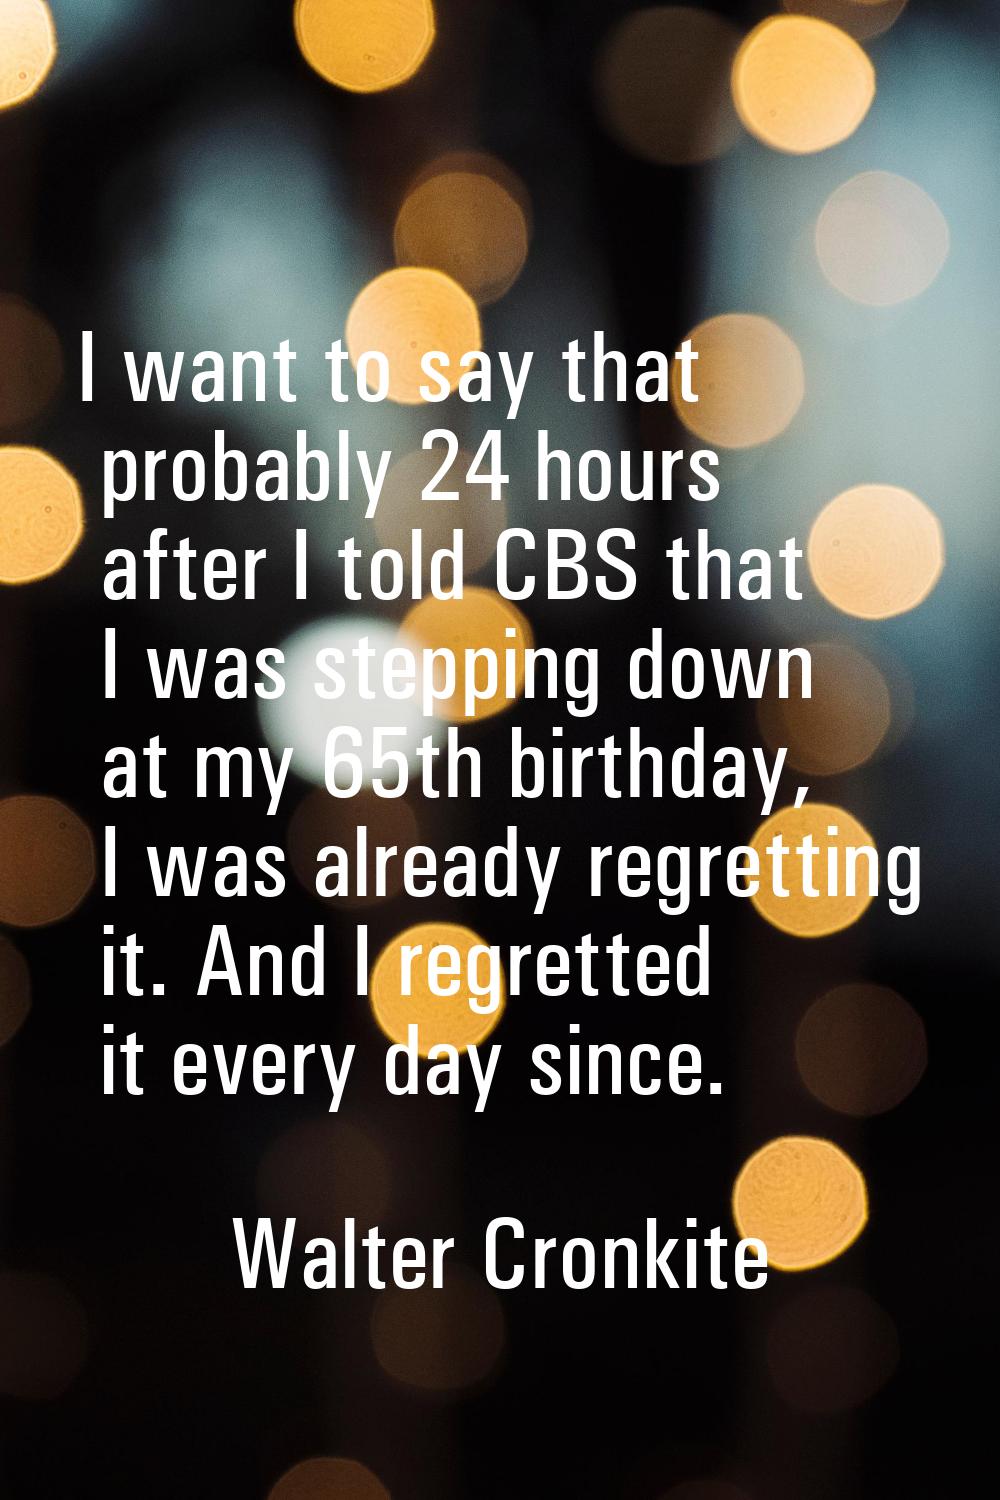 I want to say that probably 24 hours after I told CBS that I was stepping down at my 65th birthday,